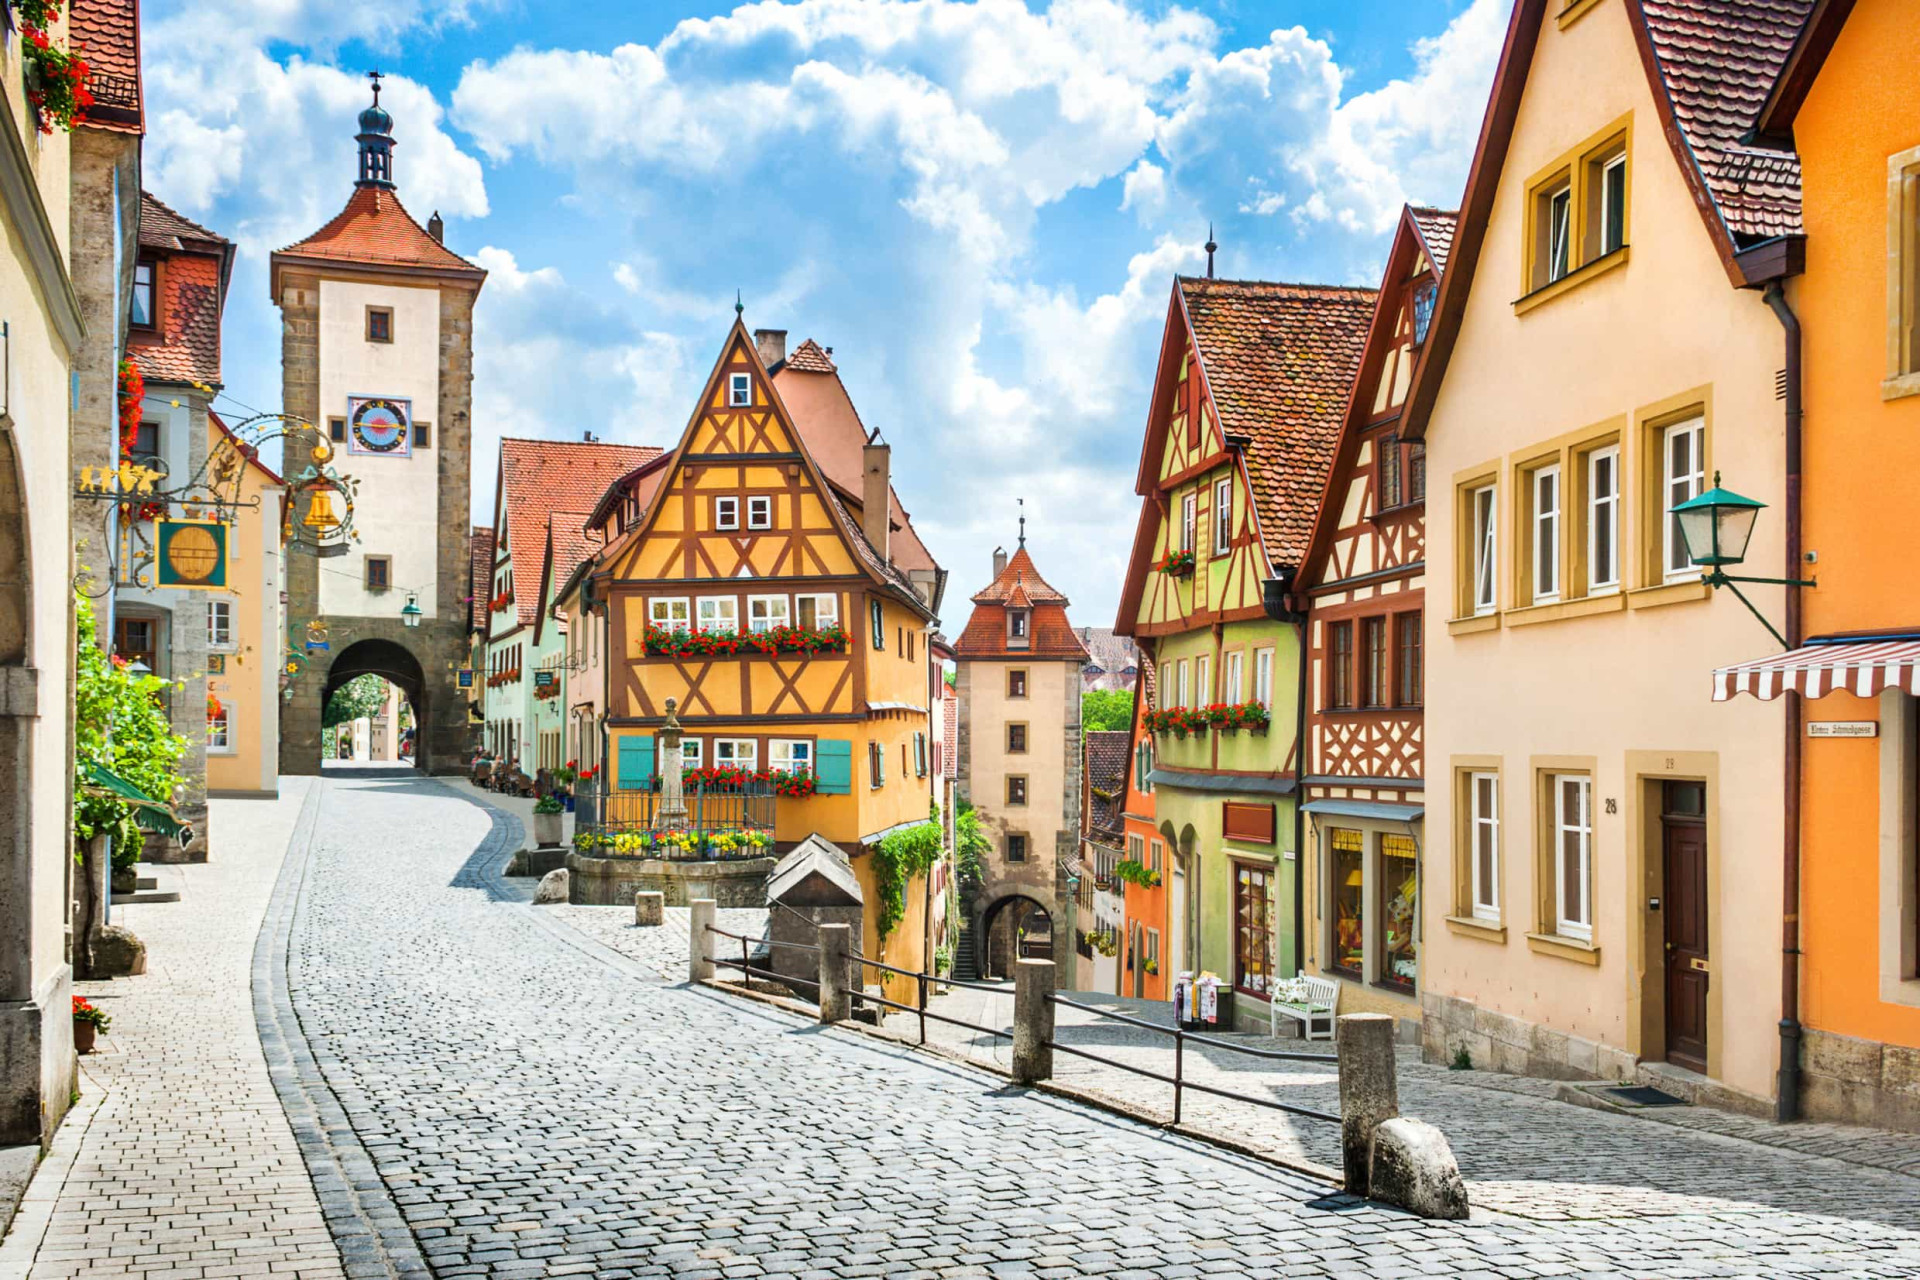 <p>This wonderfully-preserved medieval town in the Franconia region of Bavaria was seemingly made for Instagram, its colorful and timbered facades attracting visitors from all over the world.</p><p><a href="https://www.msn.com/en-us/community/channel/vid-7xx8mnucu55yw63we9va2gwr7uihbxwc68fxqp25x6tg4ftibpra?cvid=94631541bc0f4f89bfd59158d696ad7e">Follow us and access great exclusive content every day</a></p>